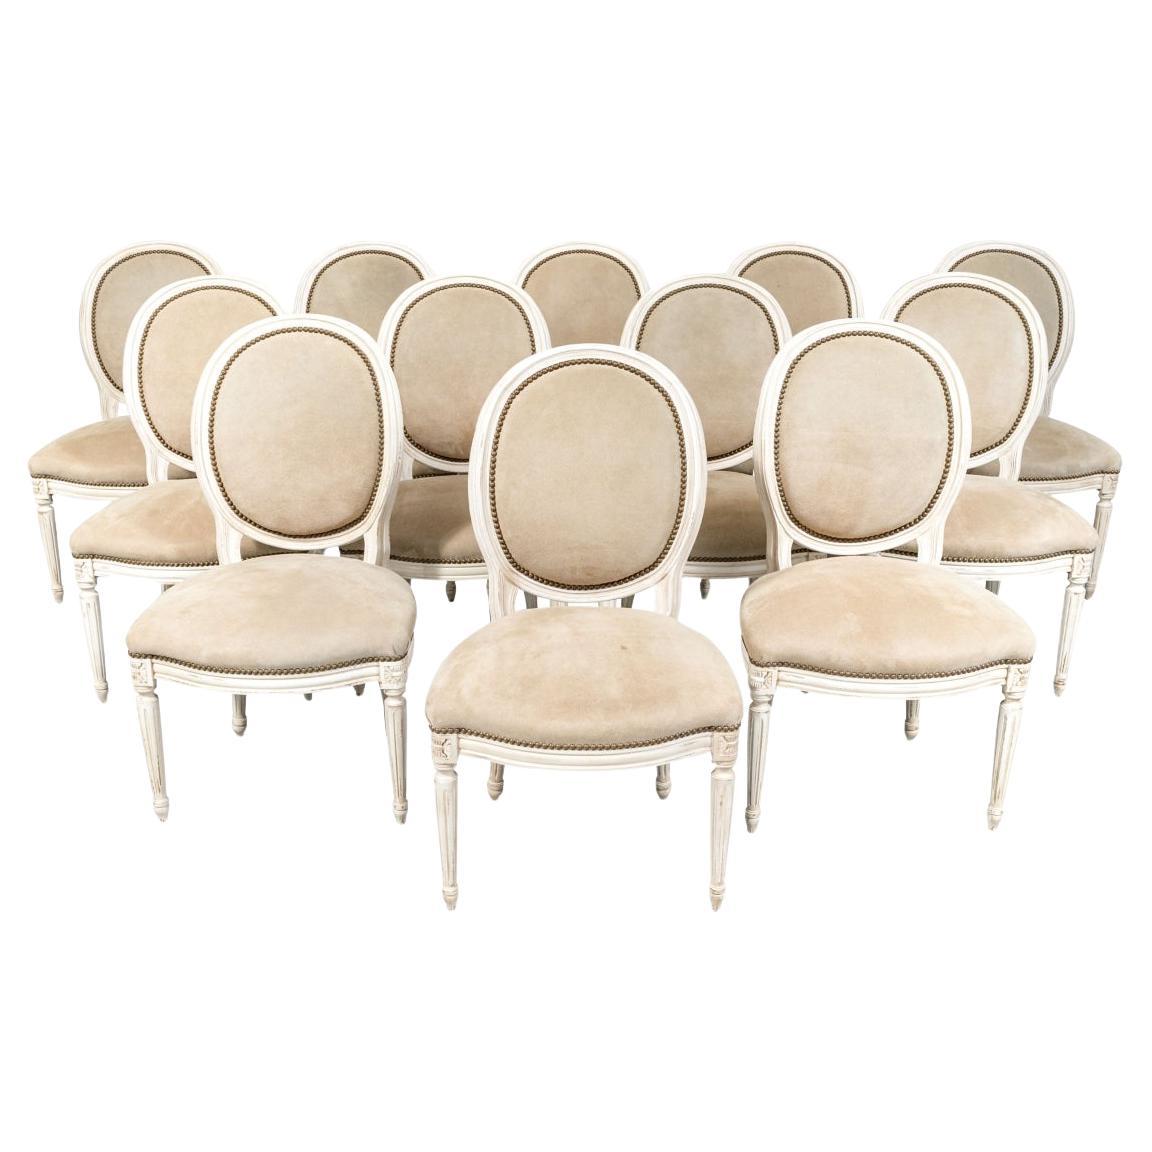 Set Of 12 Louis XVI Style Faux Suede Leather & Paint Decorated Dining Chairs For Sale